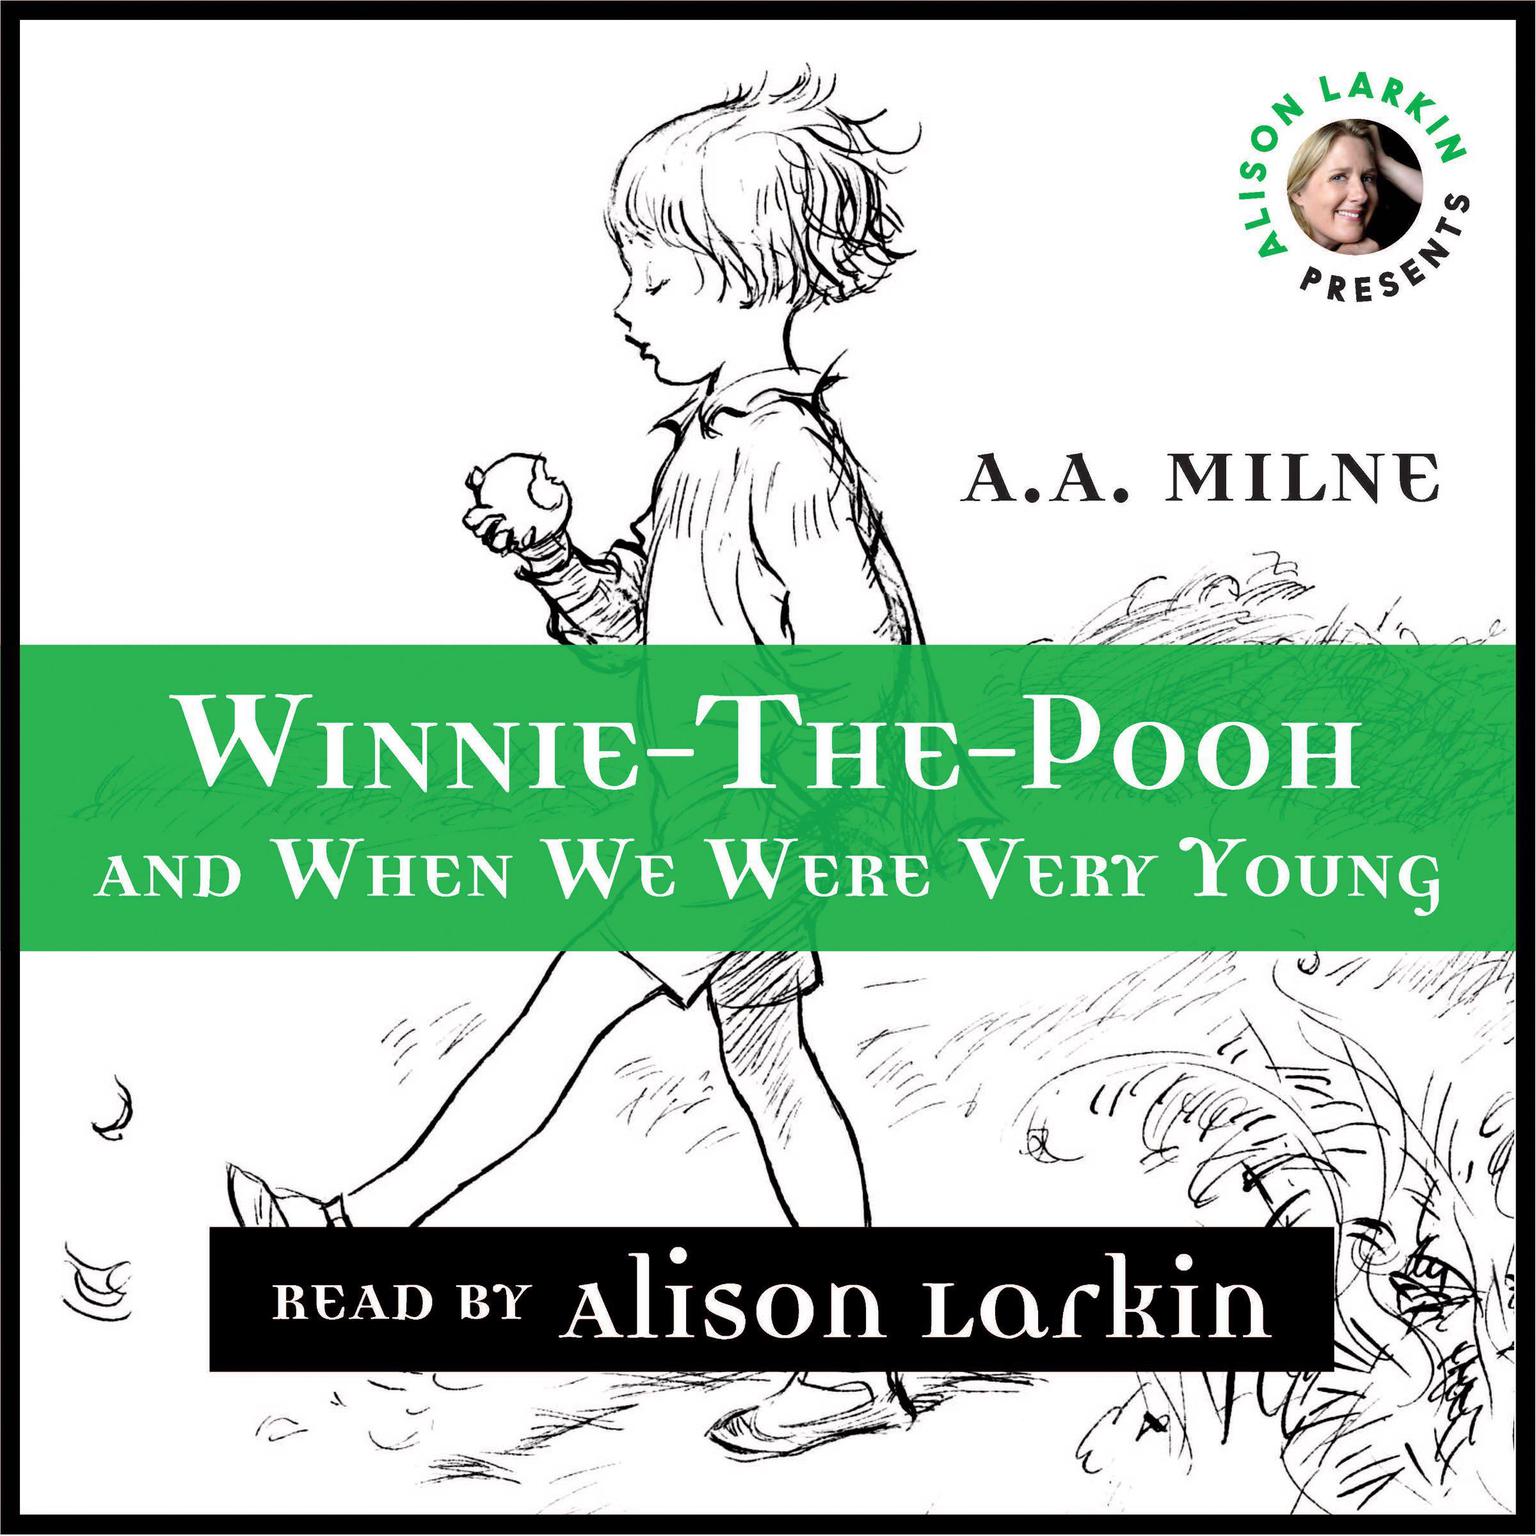 Winnie-The-Pooh and When We Were Very Young Audiobook, by A. A. Milne